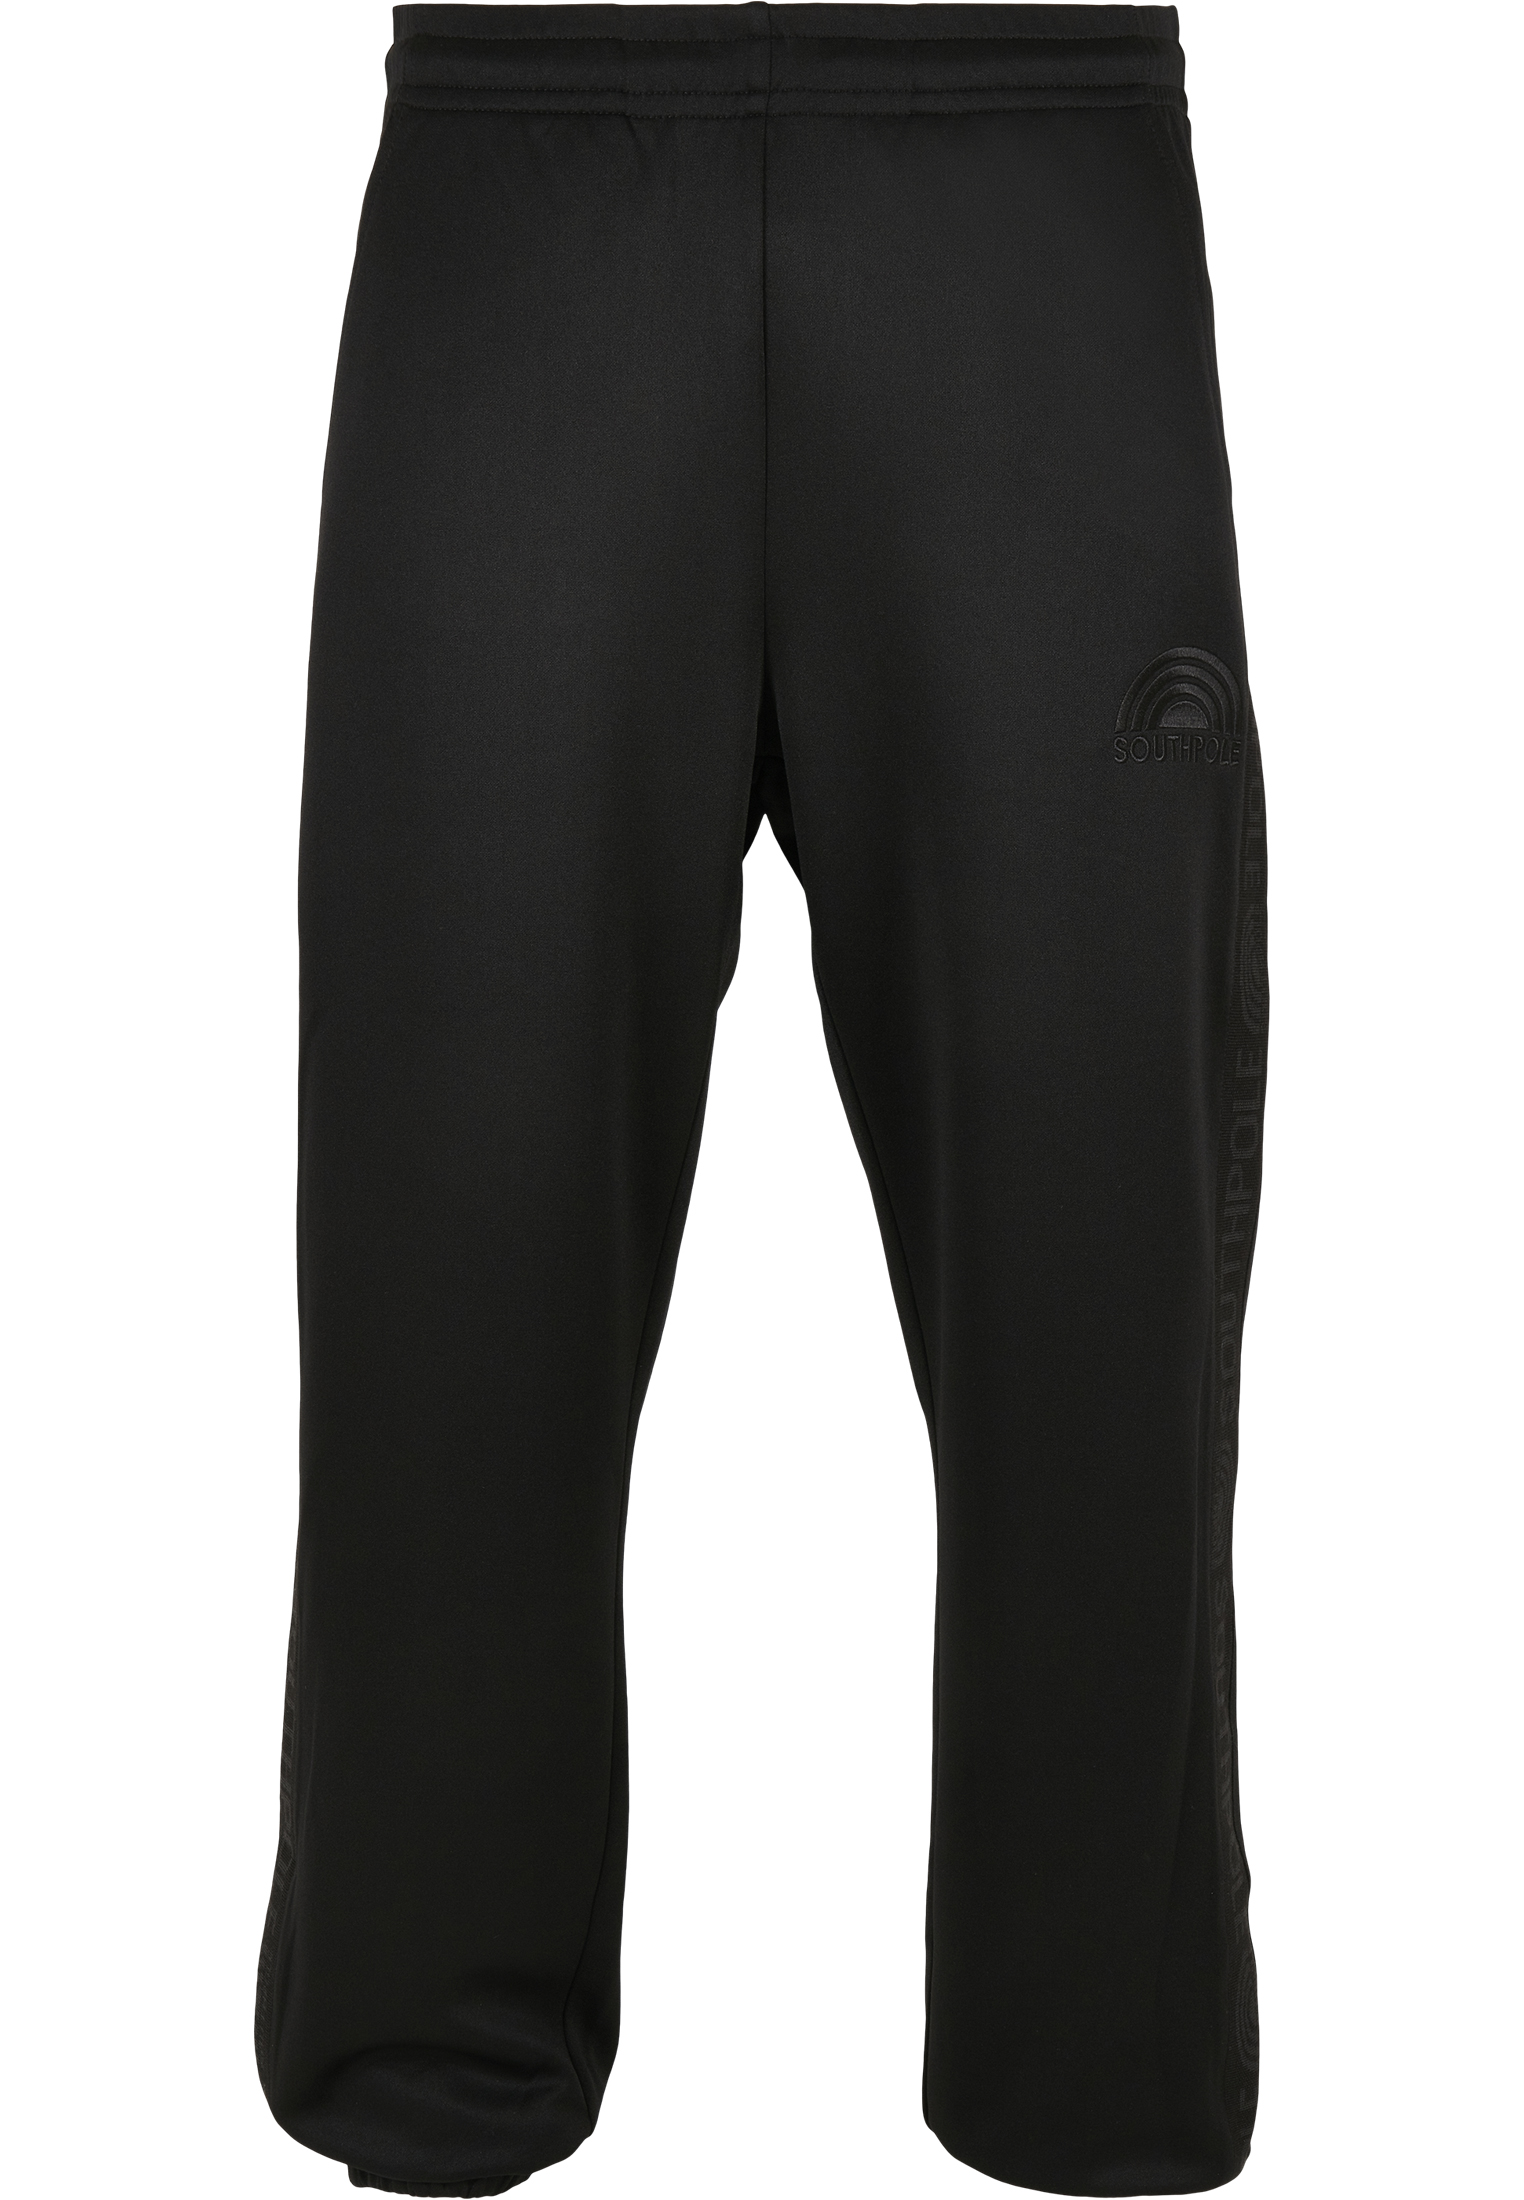 Saisonware Southpole Tricot Pants with Tape in Farbe black